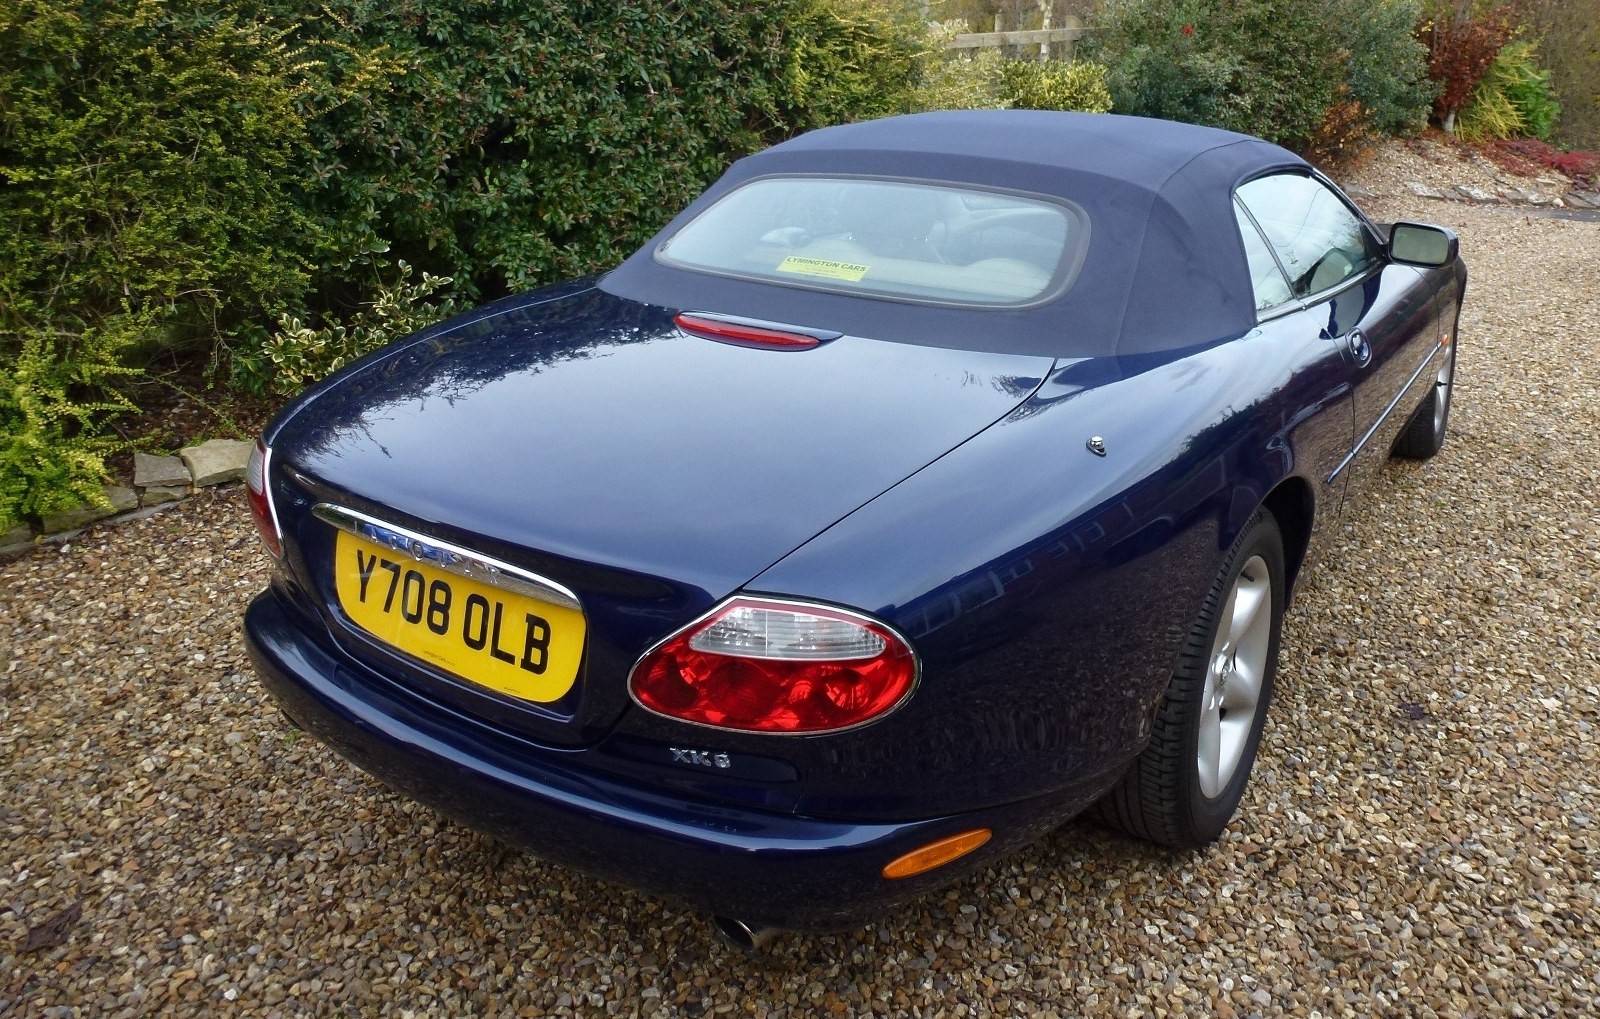 2001 Jaguar XK8 Convertible Being sold without reserve Registration number Y708 OLB Blue with a - Image 4 of 5